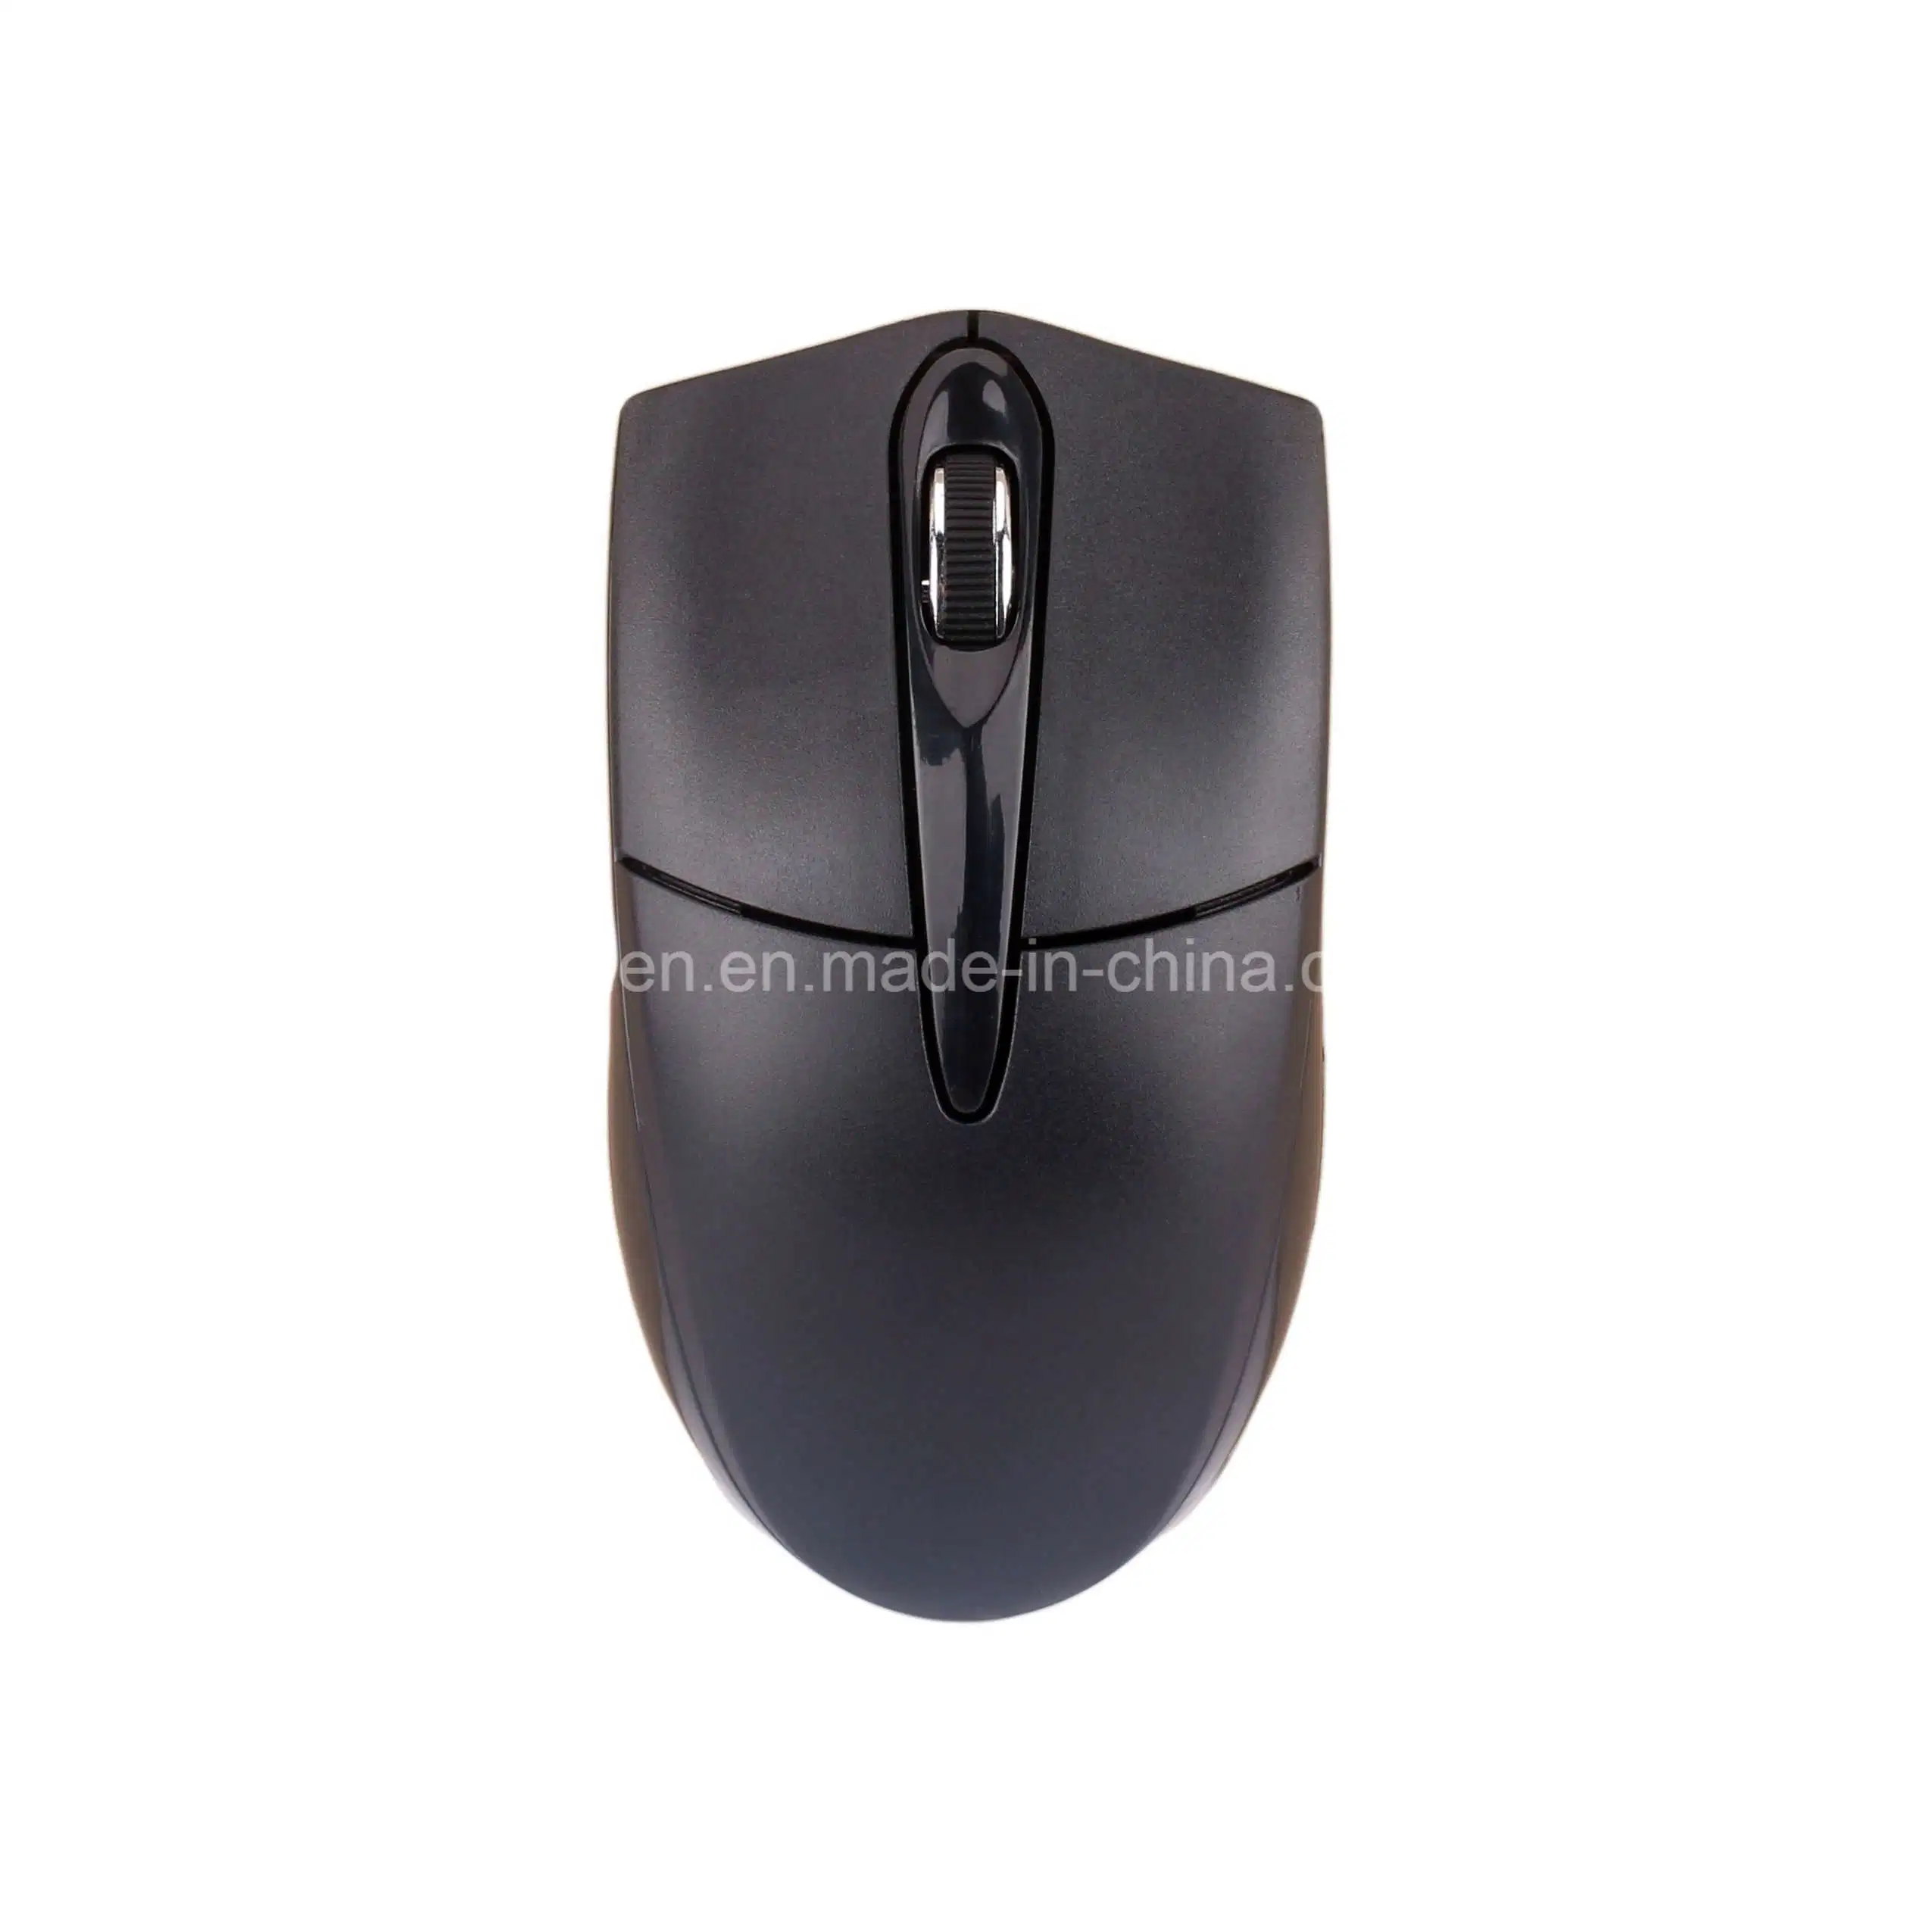 2018 New Wireless Mouse, Office Design